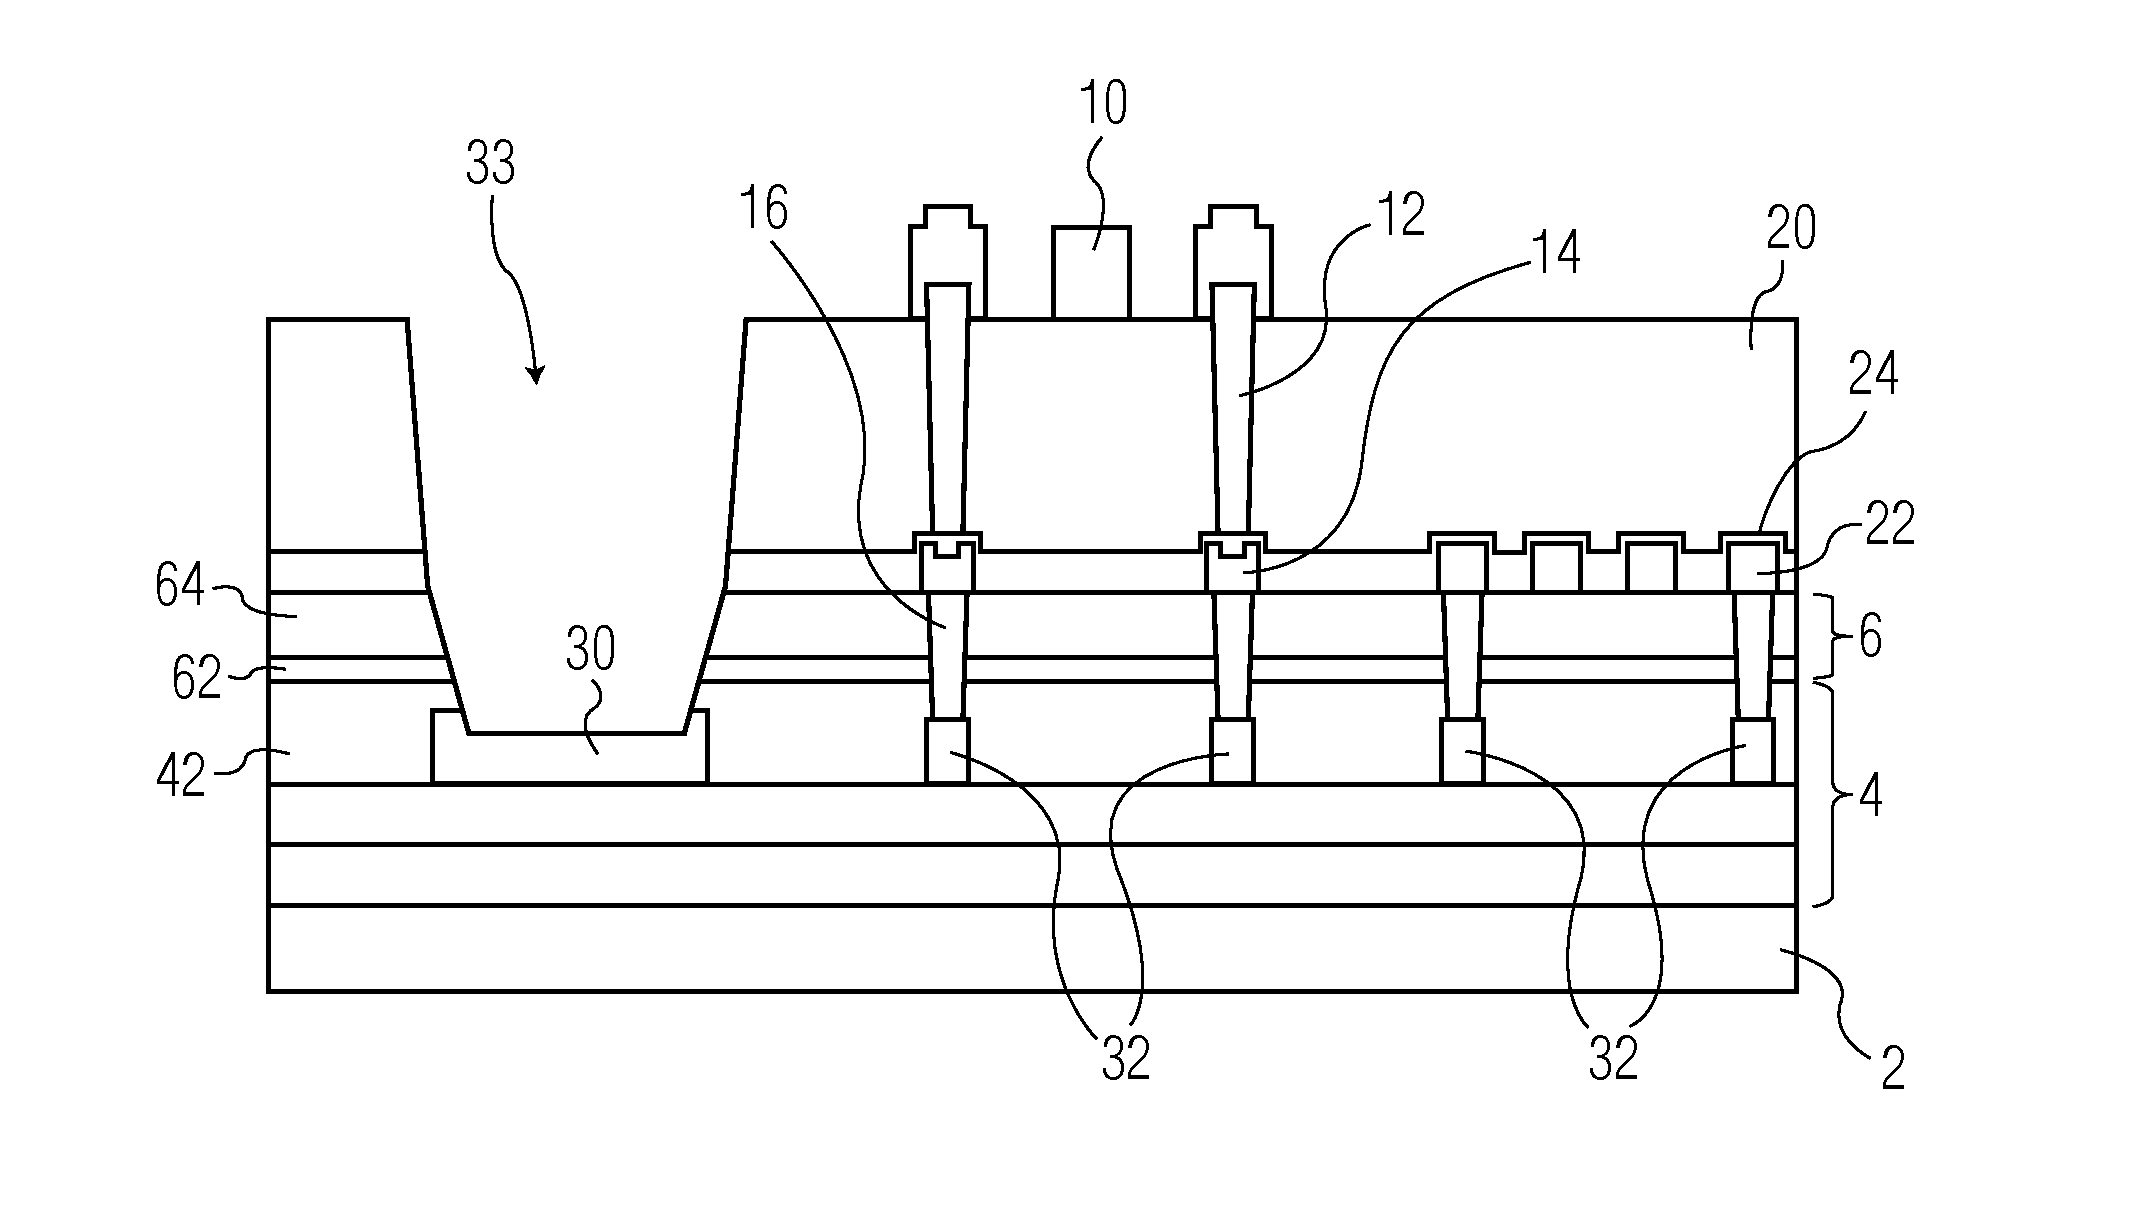 Integrated circuit comprising a thermal conductivity based gas sensor